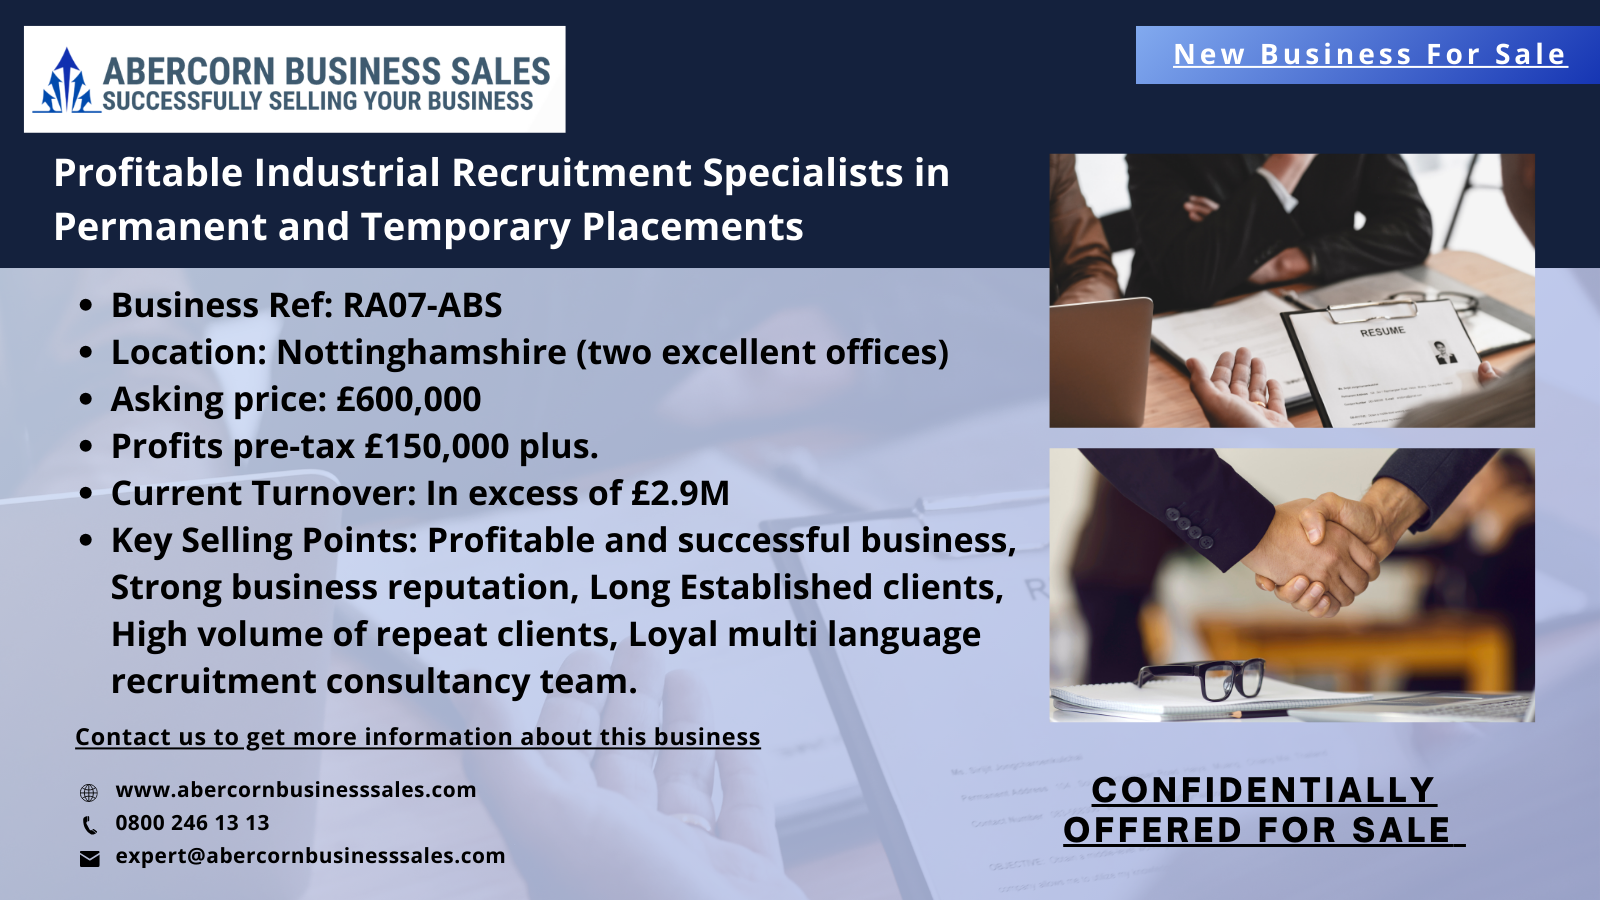 RA07-ABS - Profitable Industrial Recruitment Specialists in Permanent and Temporary Placements